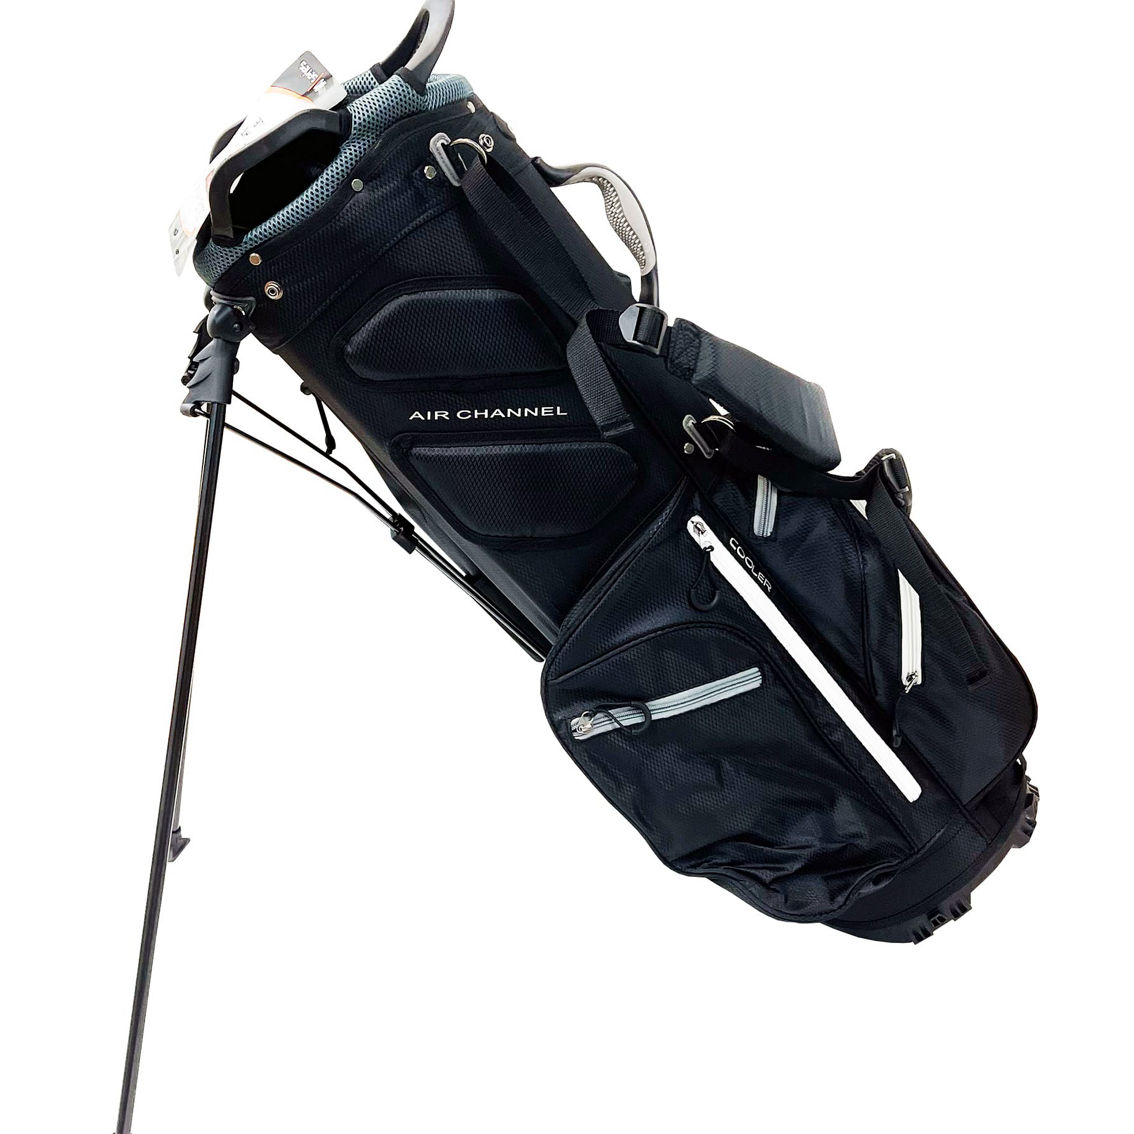 GOLF GIFTS & GALLERY 400 SERIES STAND BAG BLACK GREY - Image 5 of 5